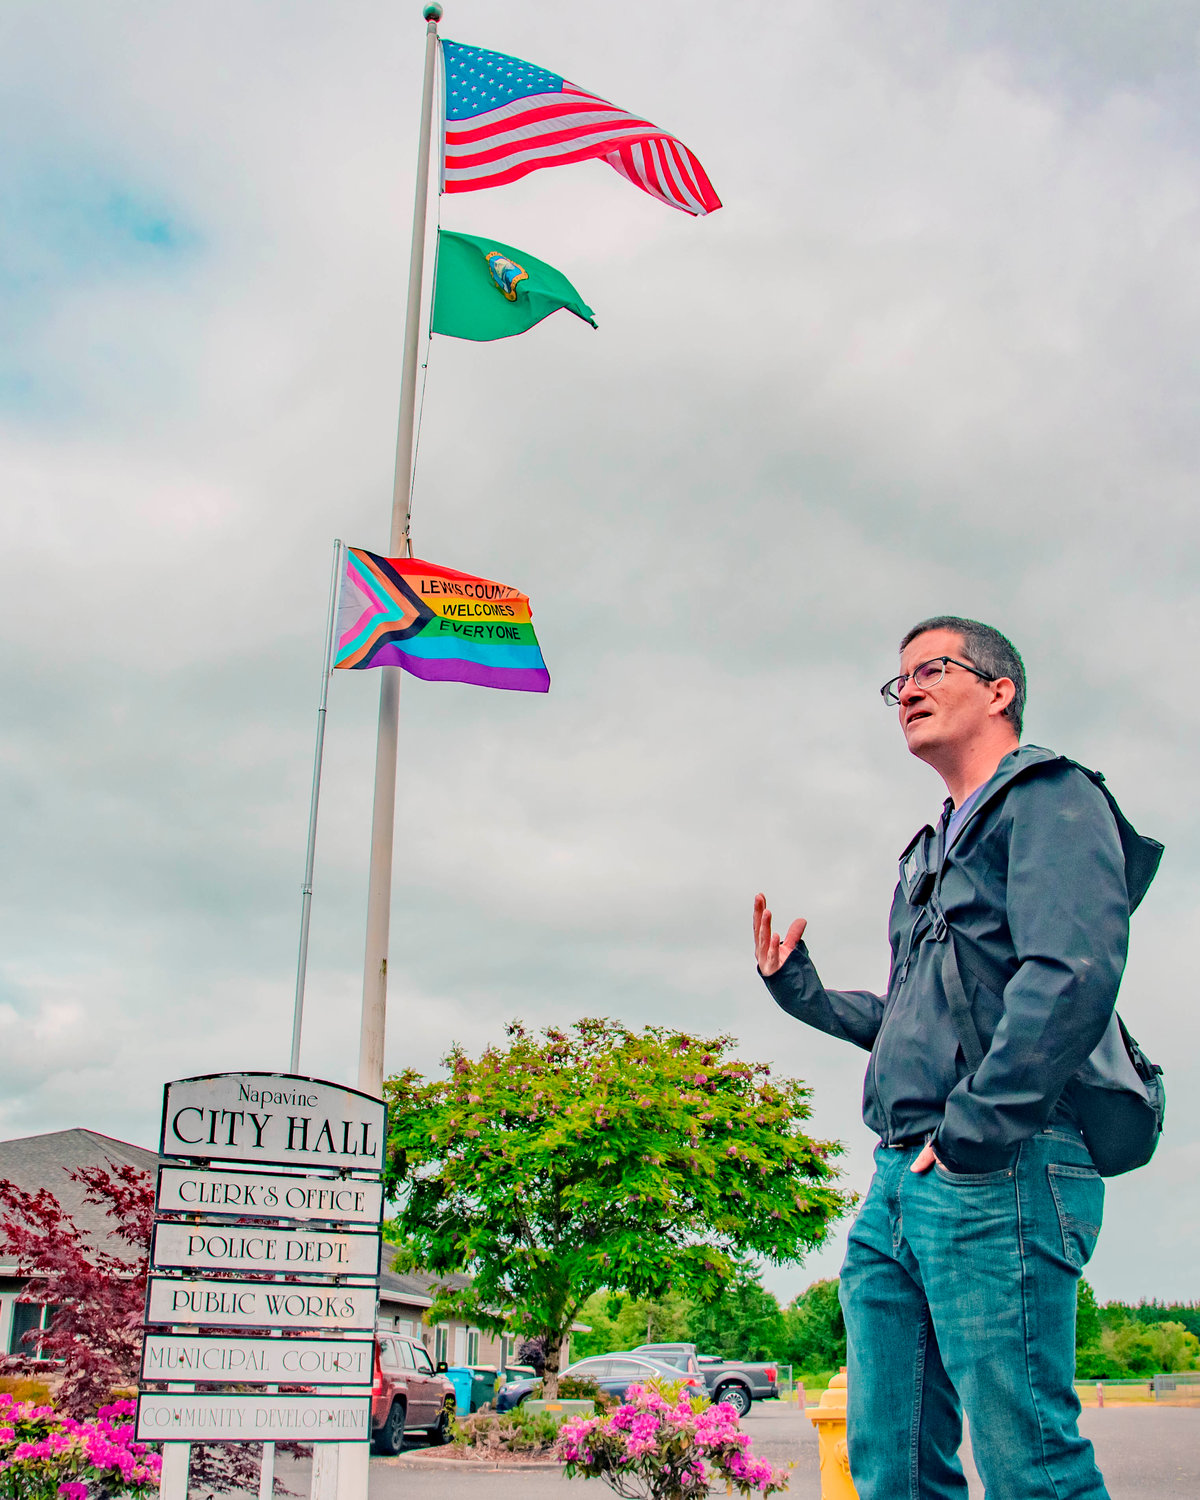 Kyle Wheeler of the Lewis County Lollipop Guild talks about why they wear a body cam after a flag which reads, “Lewis County Welcomes Everyone,” was erected outside Napavine City Hall Thursday morning.